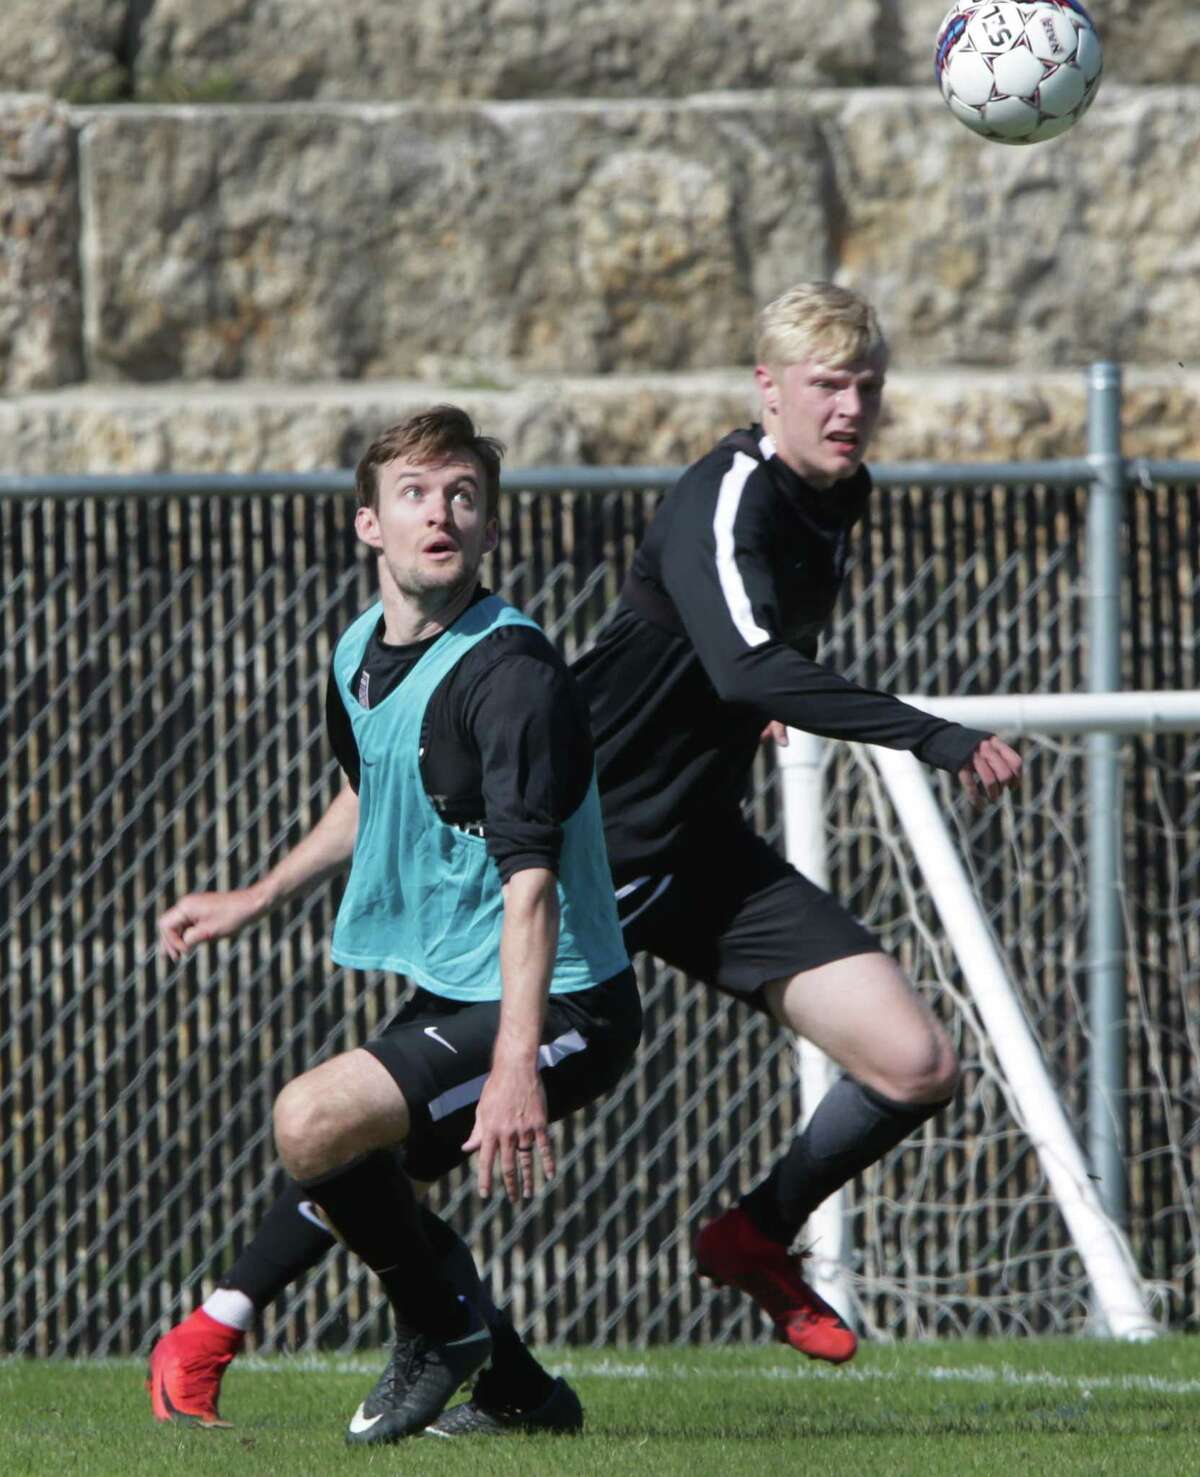 San Antonio FC defender Greg Cochrane (left) watches the ball in front of midfielder Connor Presley during training camp.